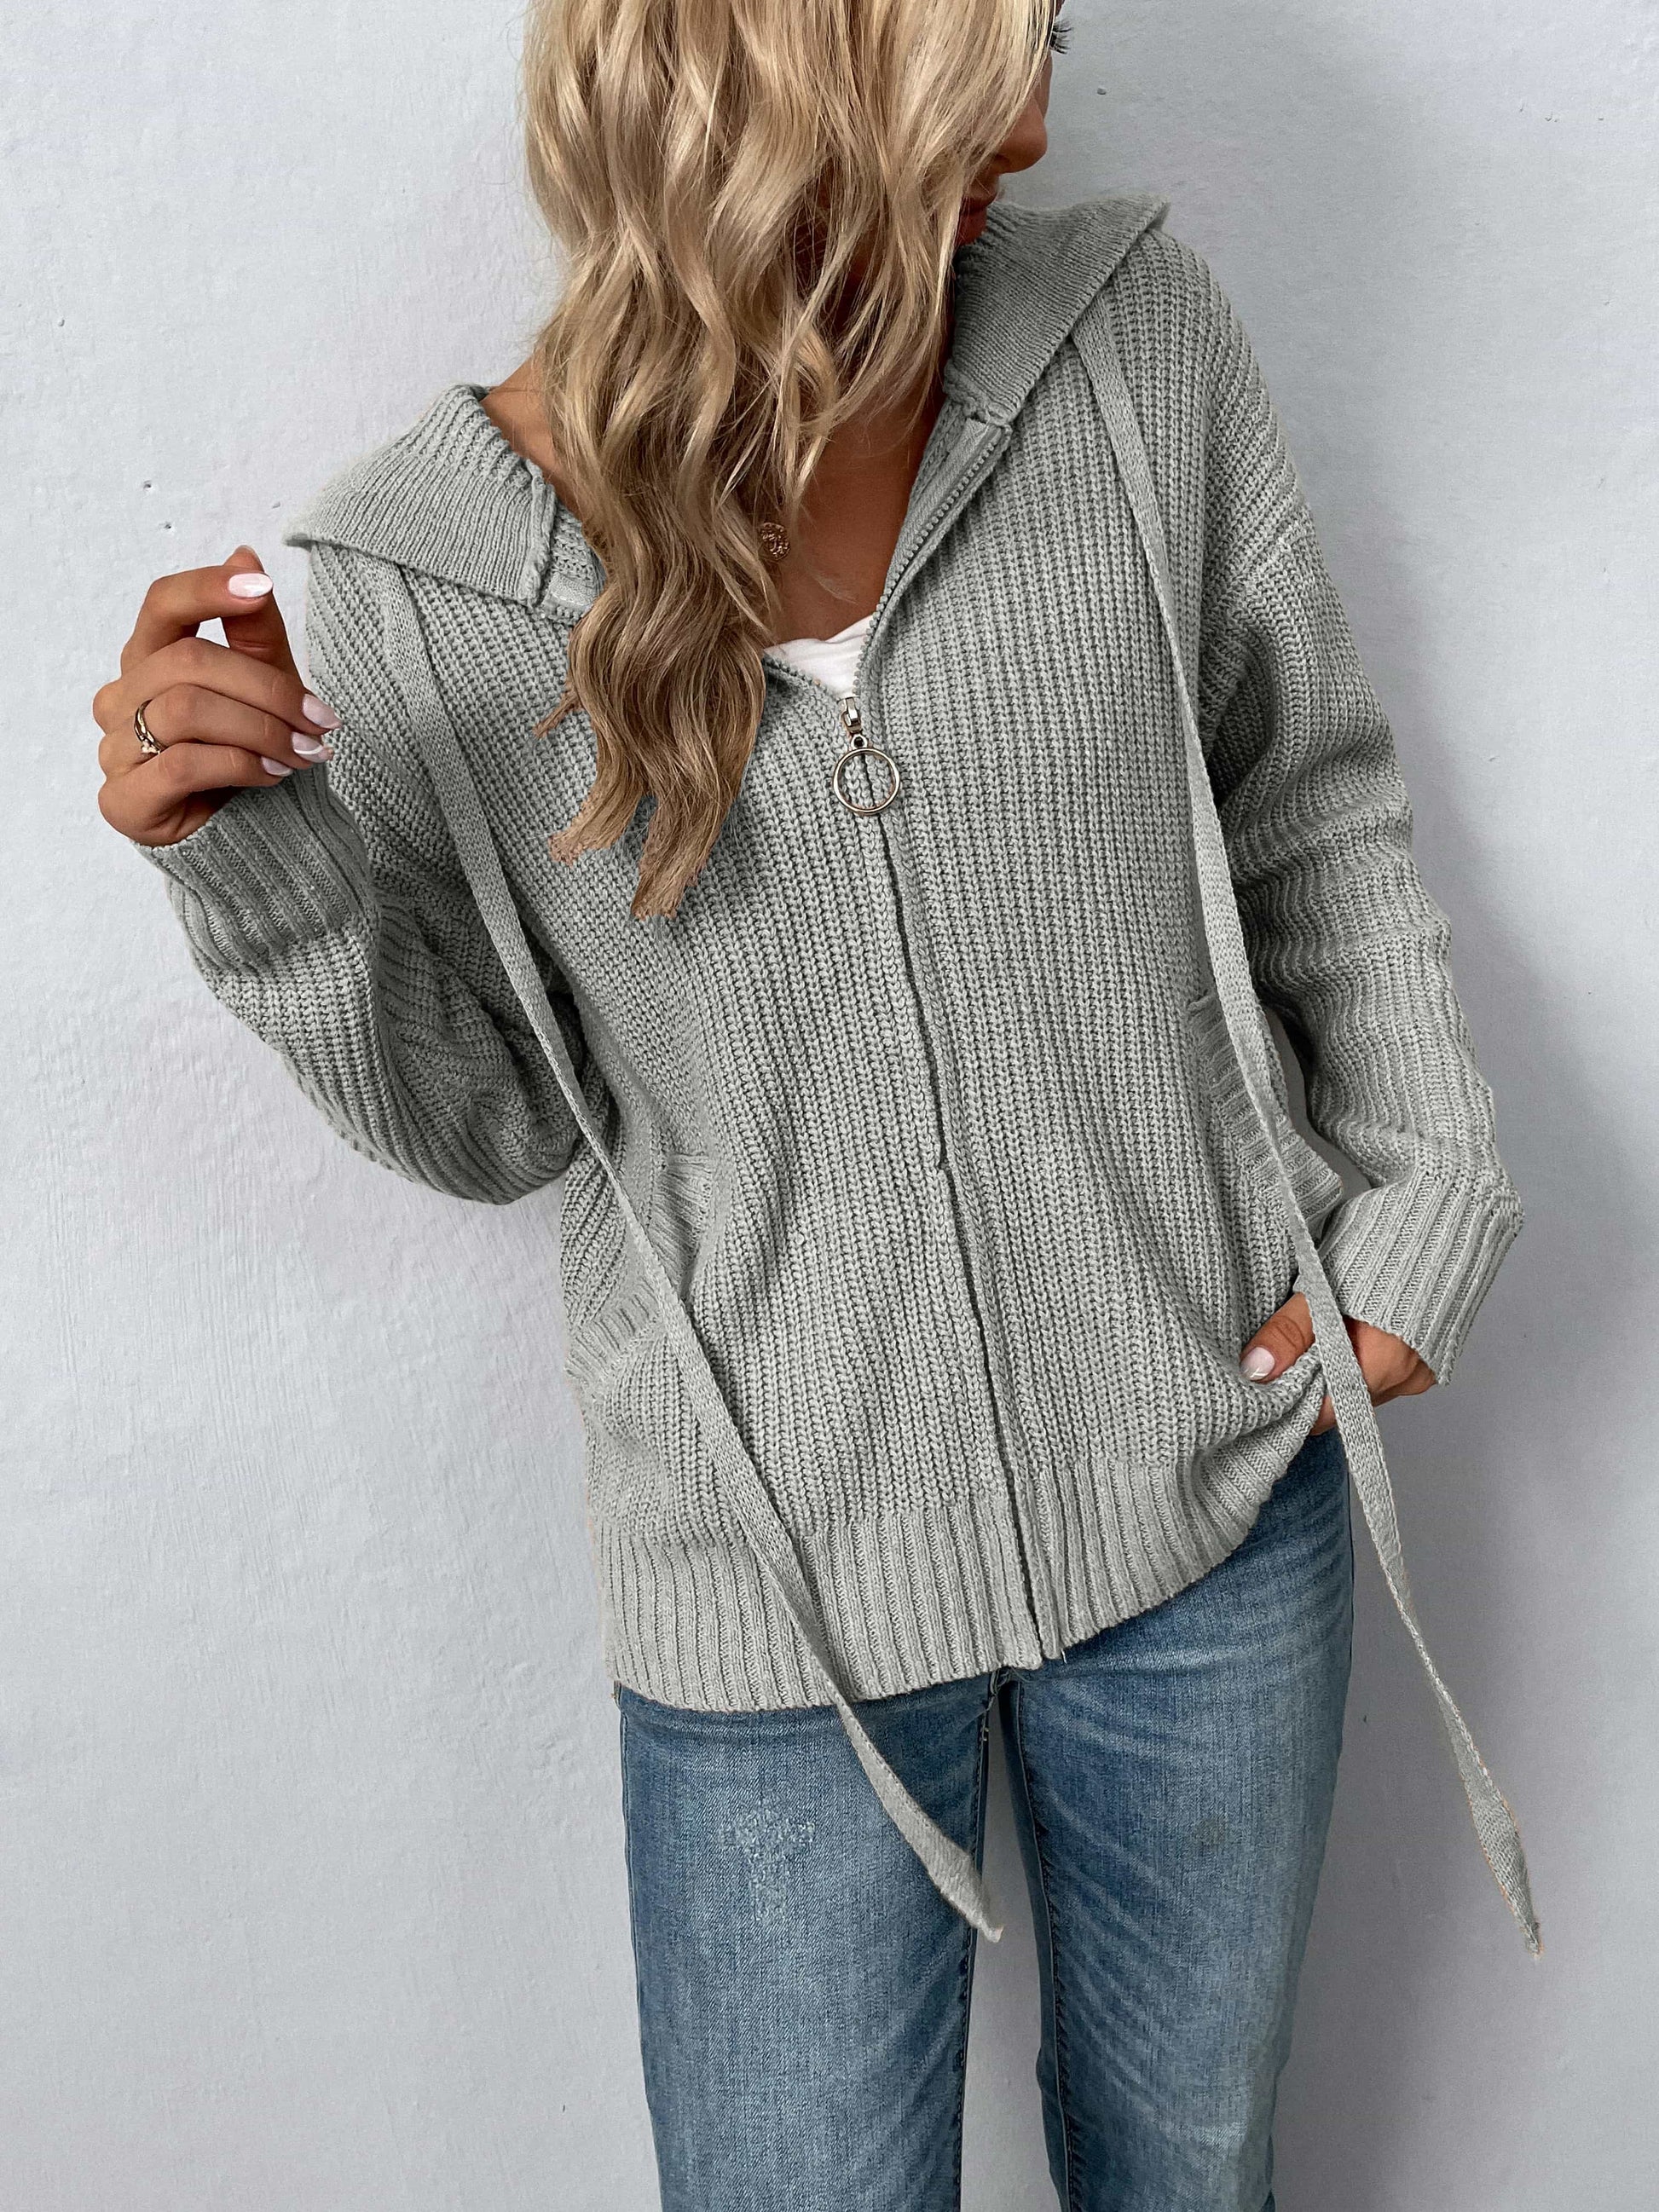 Zip-Up Drawstring Detail Hooded Cardigan - Women’s Clothing & Accessories - Shirts & Tops - 12 - 2024